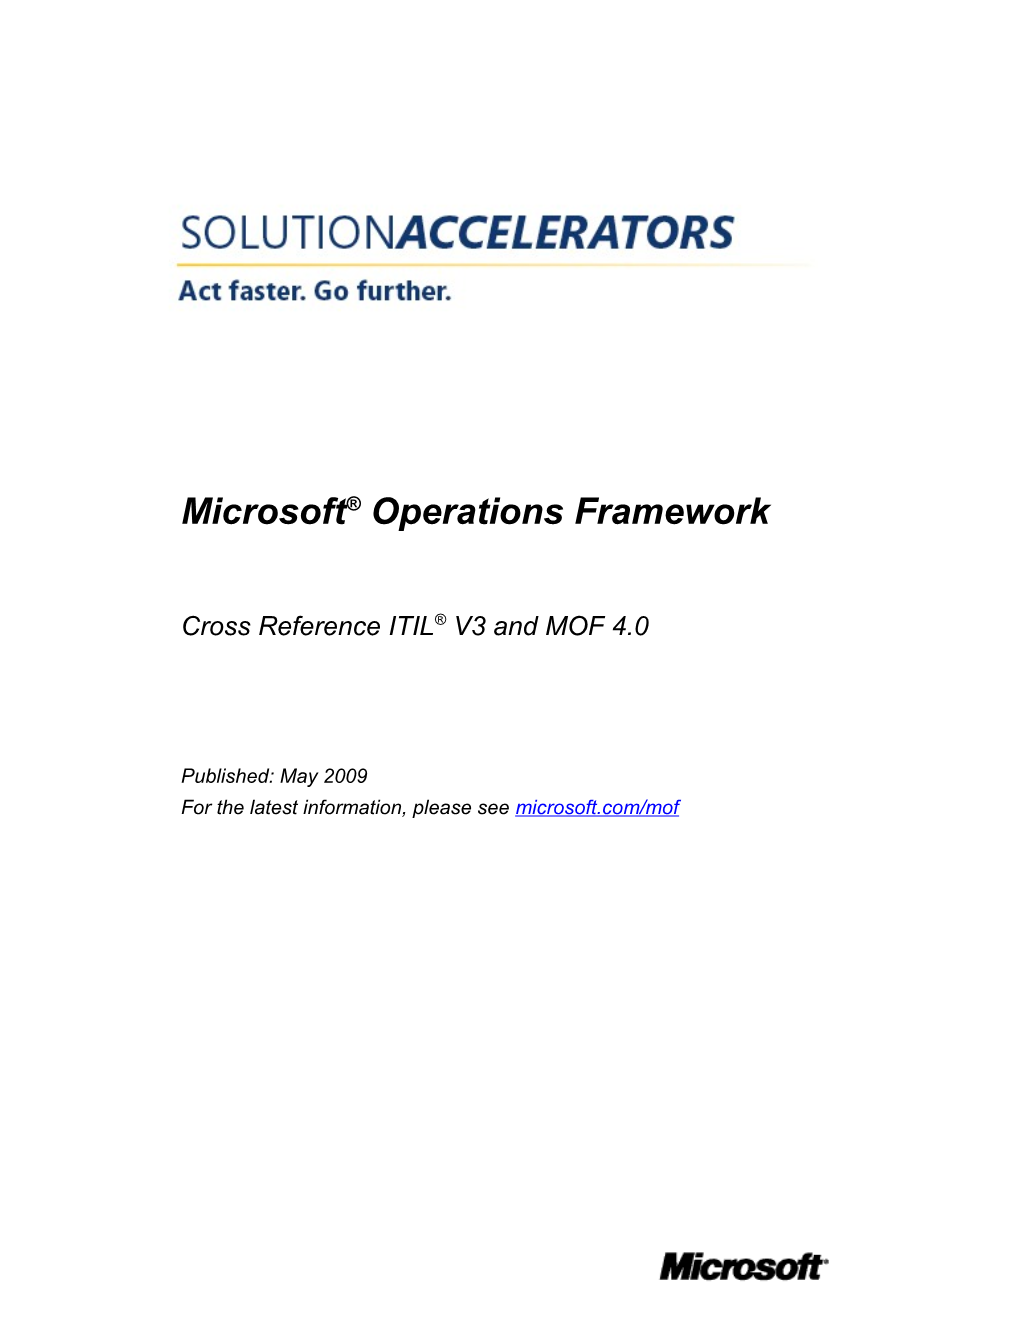 Cross Reference ITIL V3 and MOF 4.0